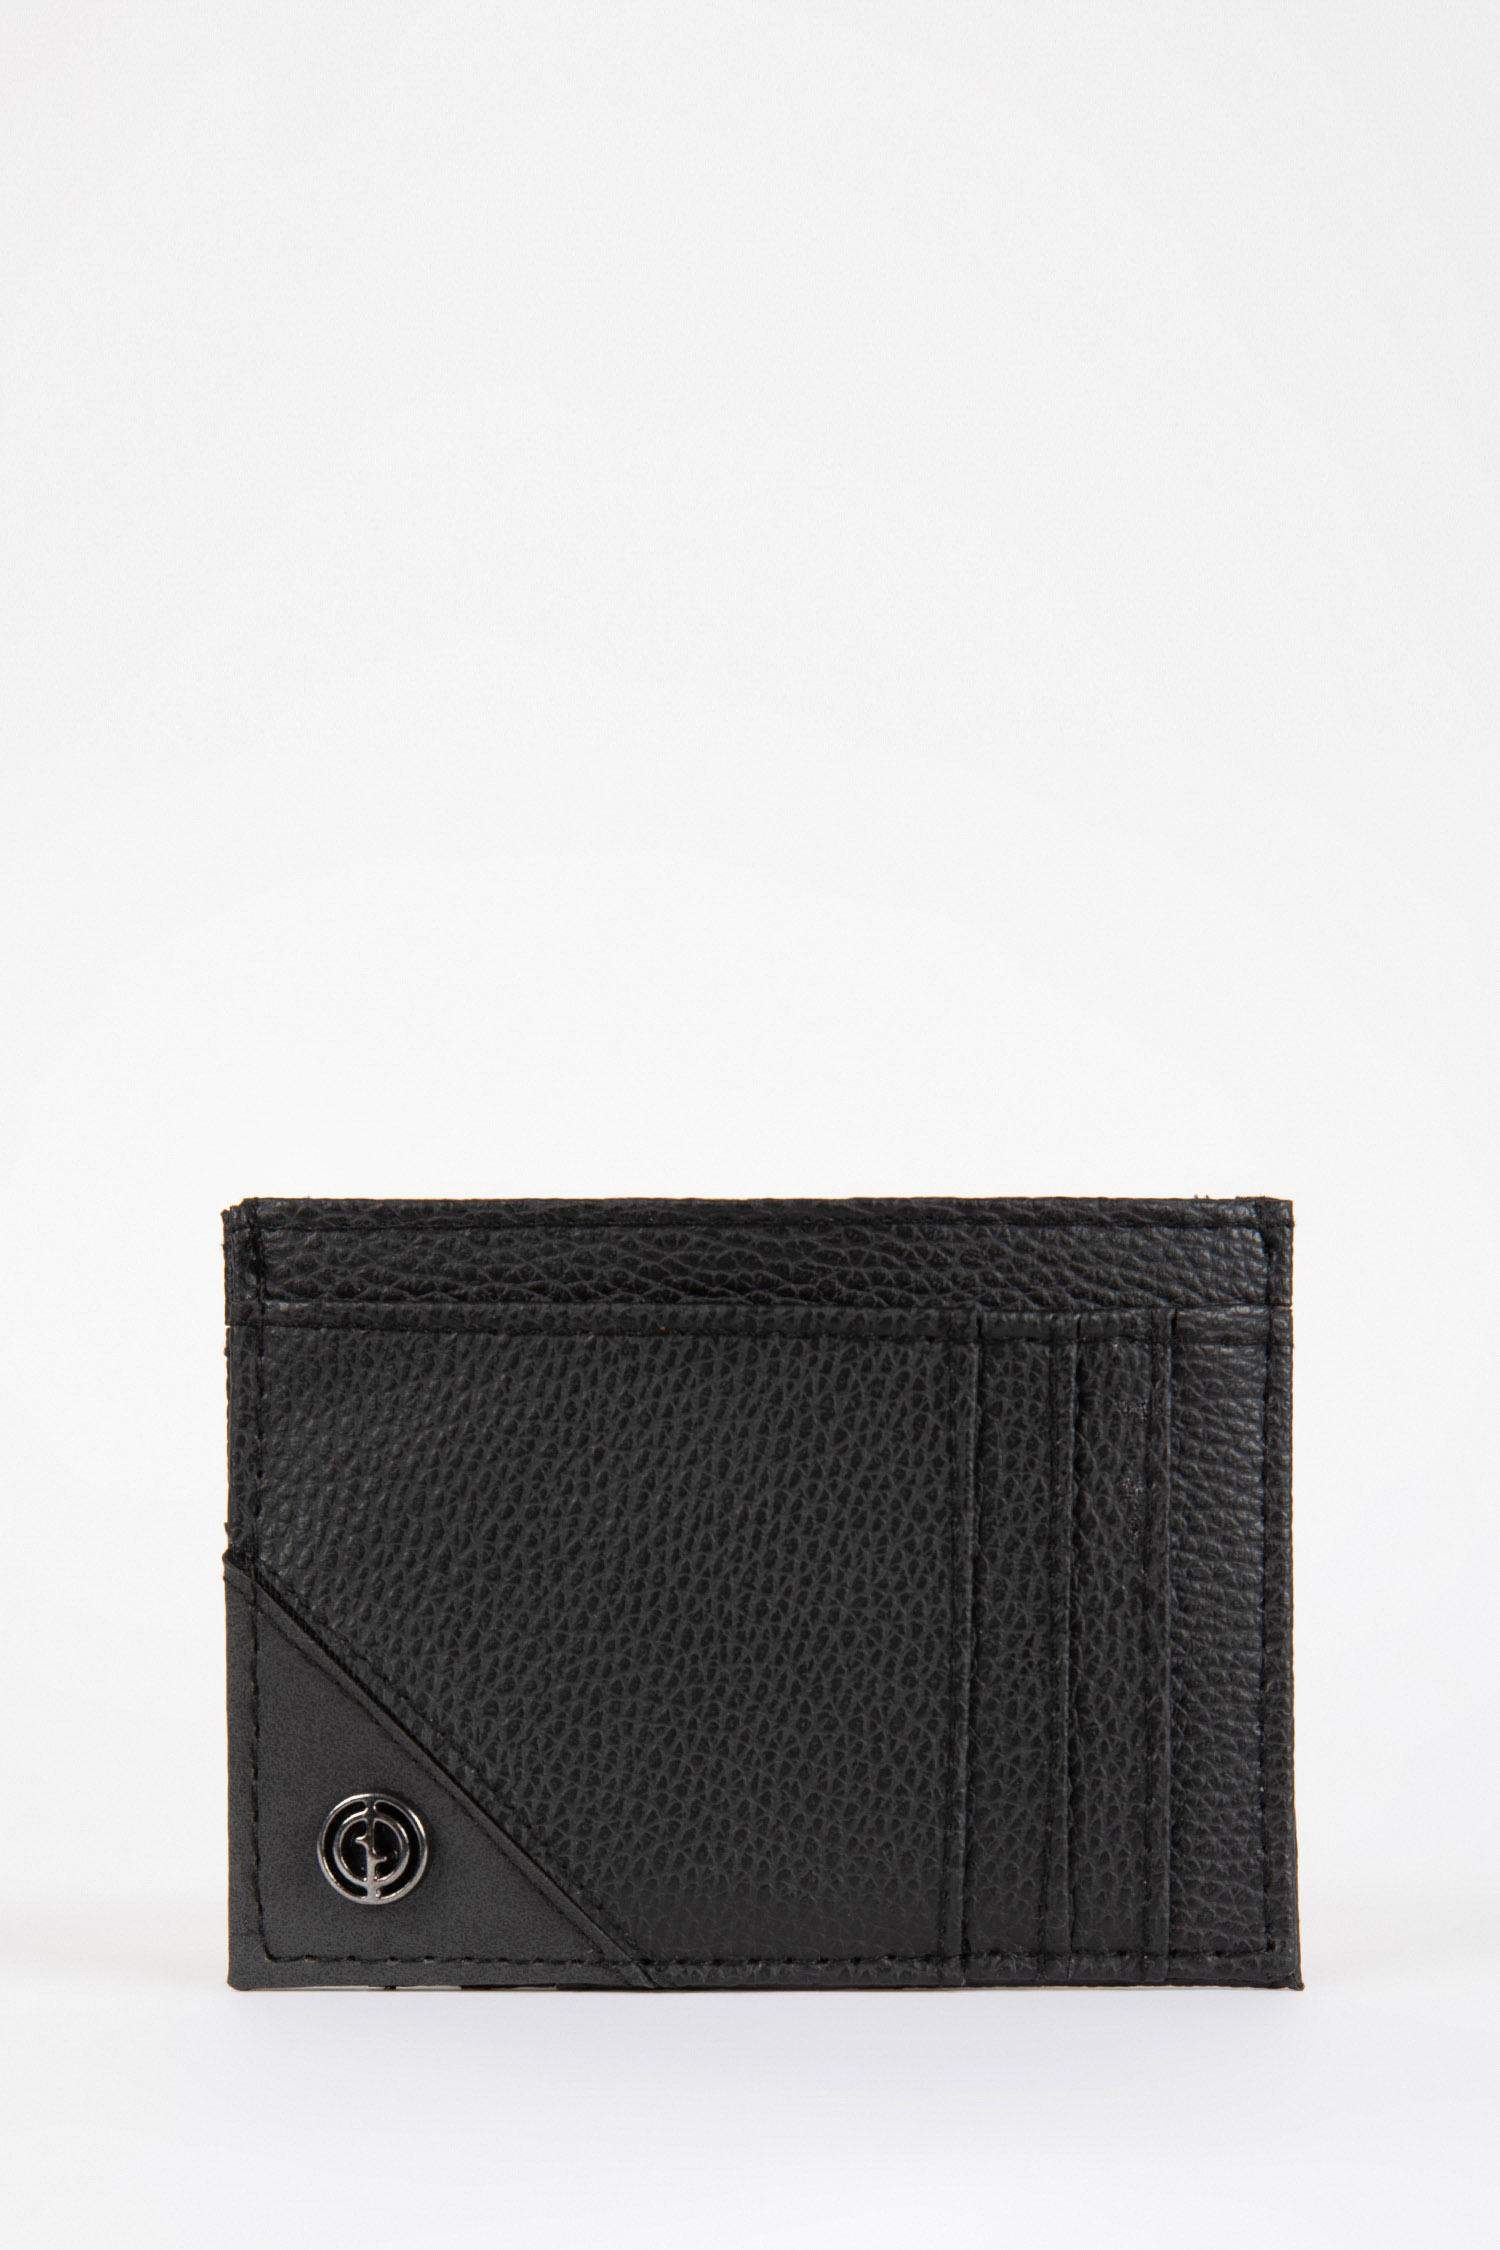 Shop Burberry Unisex Plain Leather Logo Card Holders by ACCESS